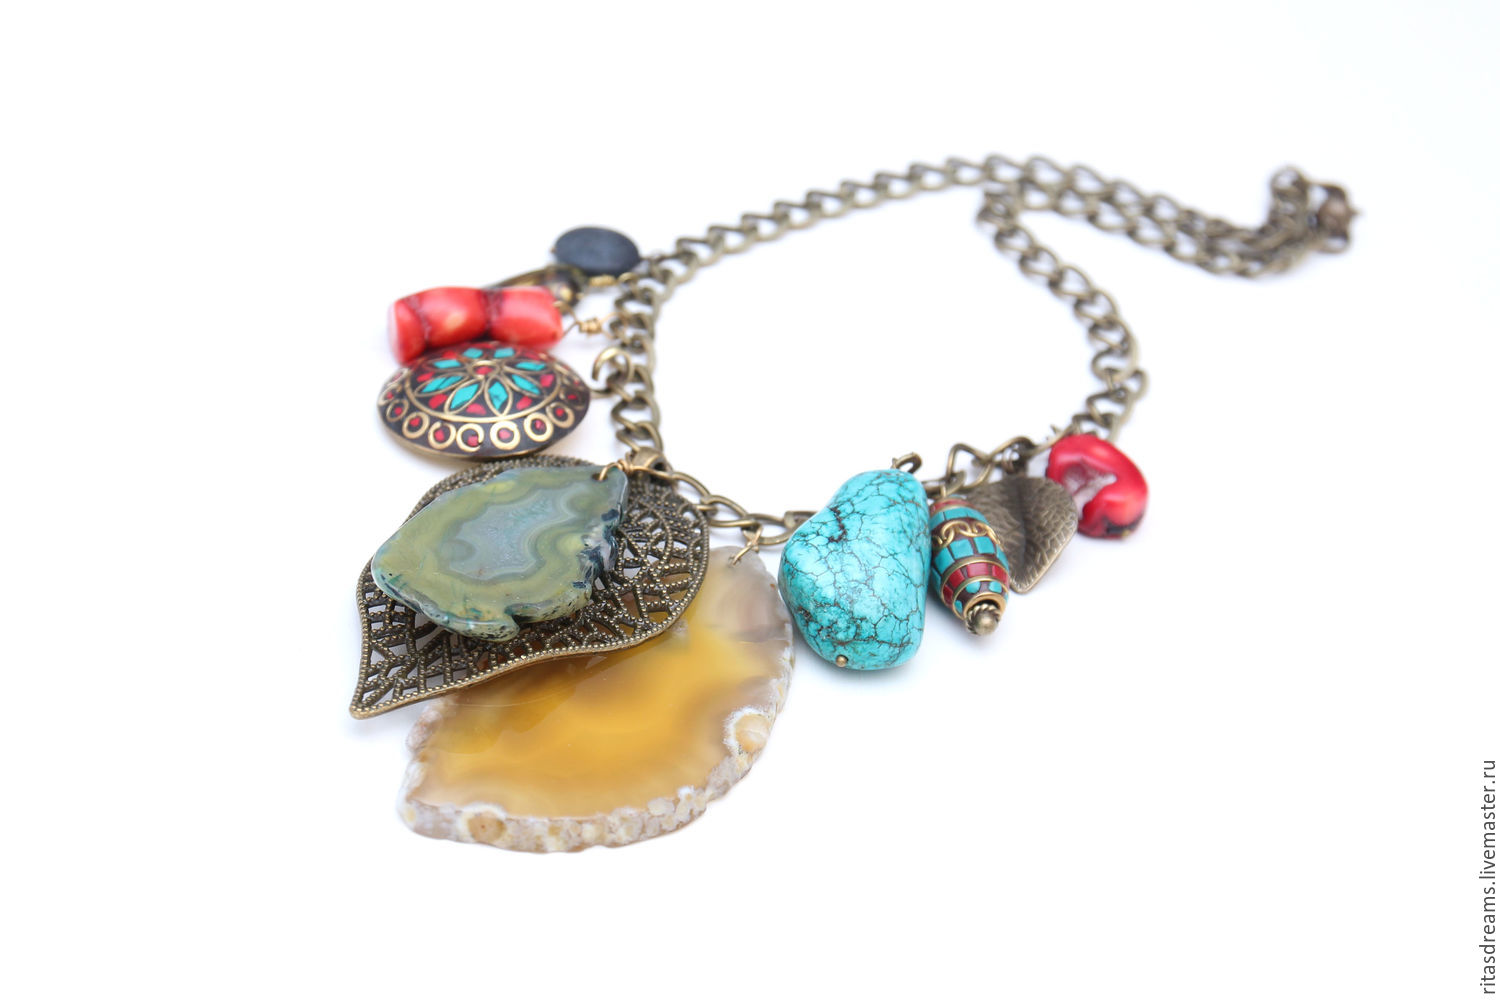 Necklace large chain with large stones, corals, pearls, Tibetan pendants and beads, inlaid with coral and turquoise.
